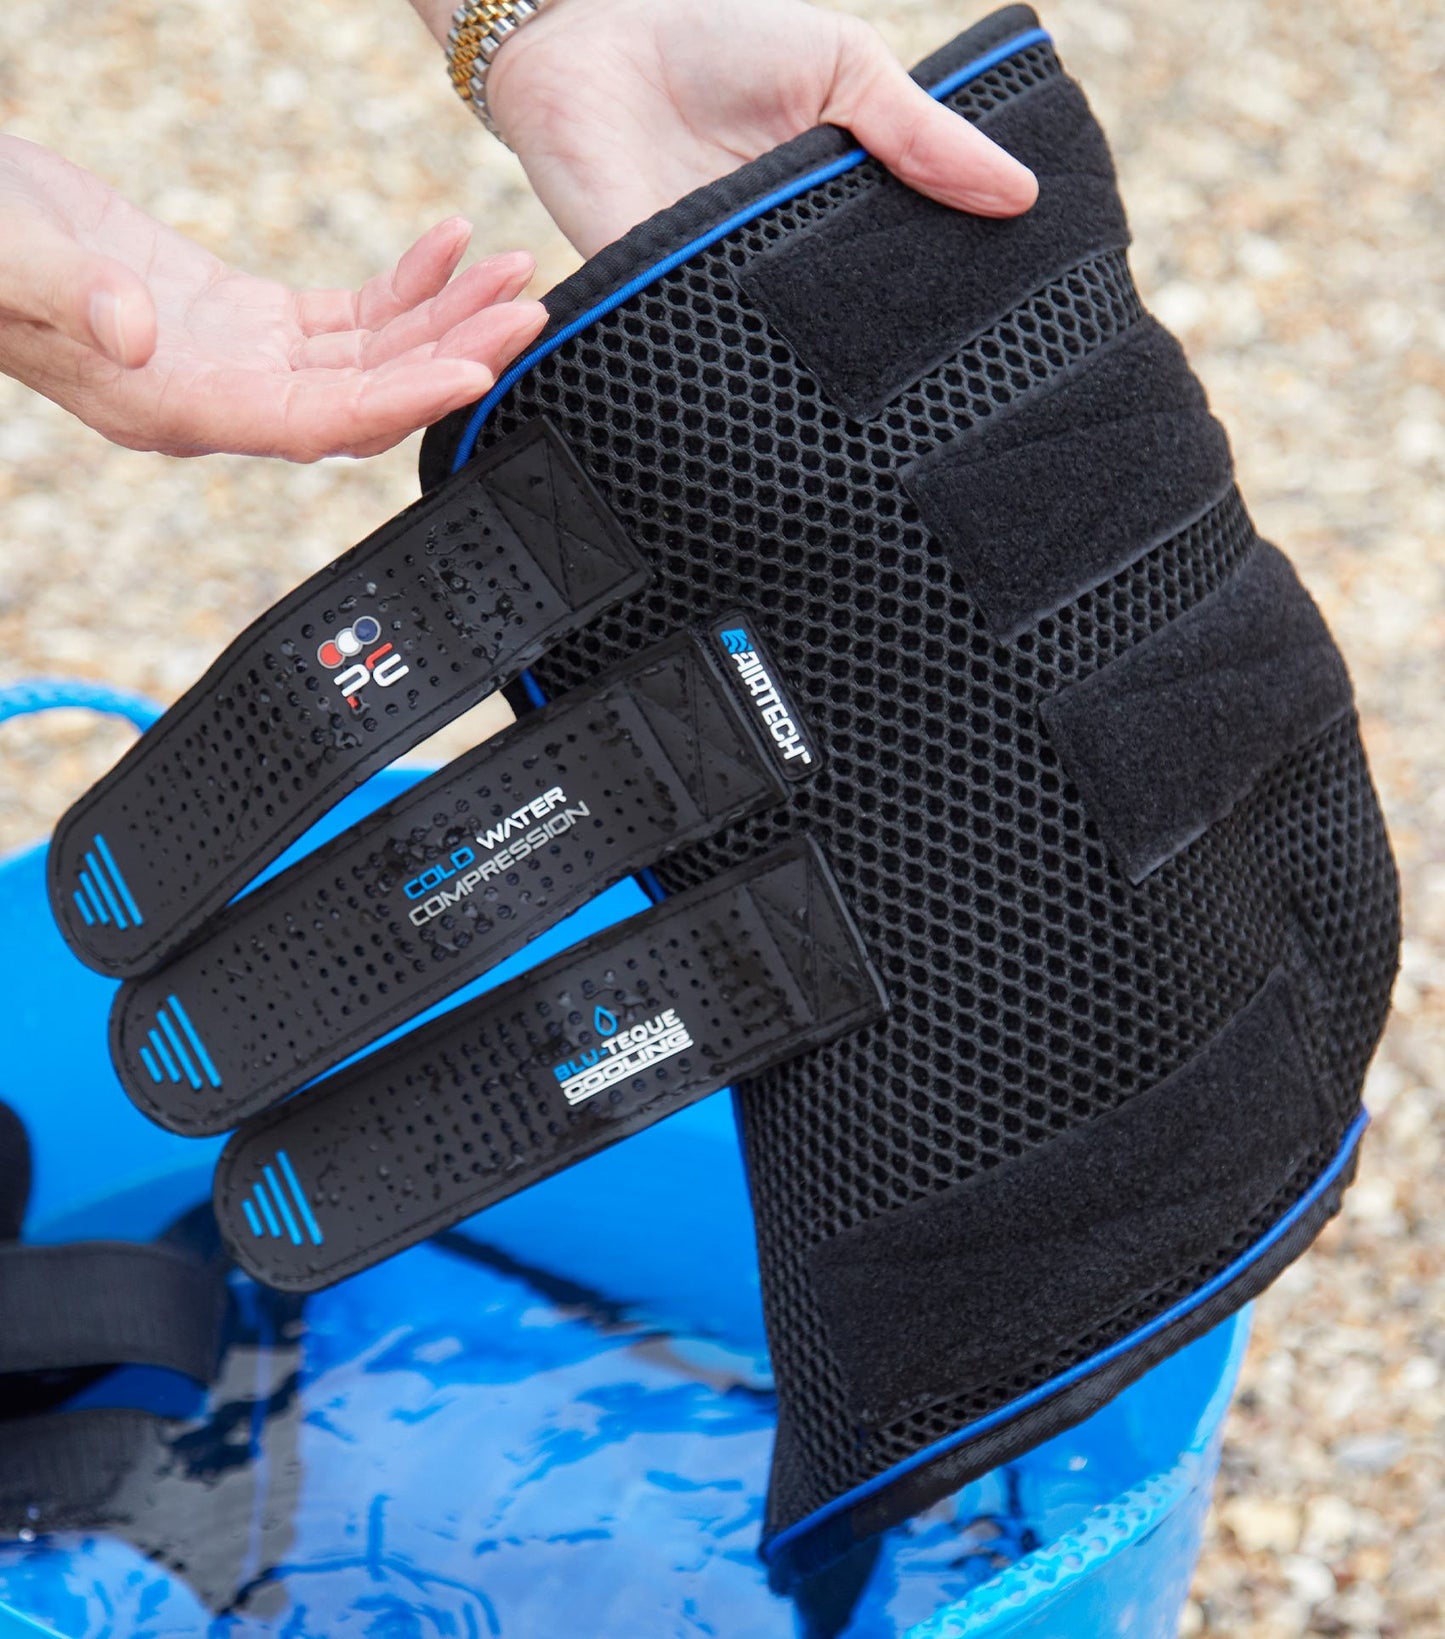 Cold Water Compression Boots